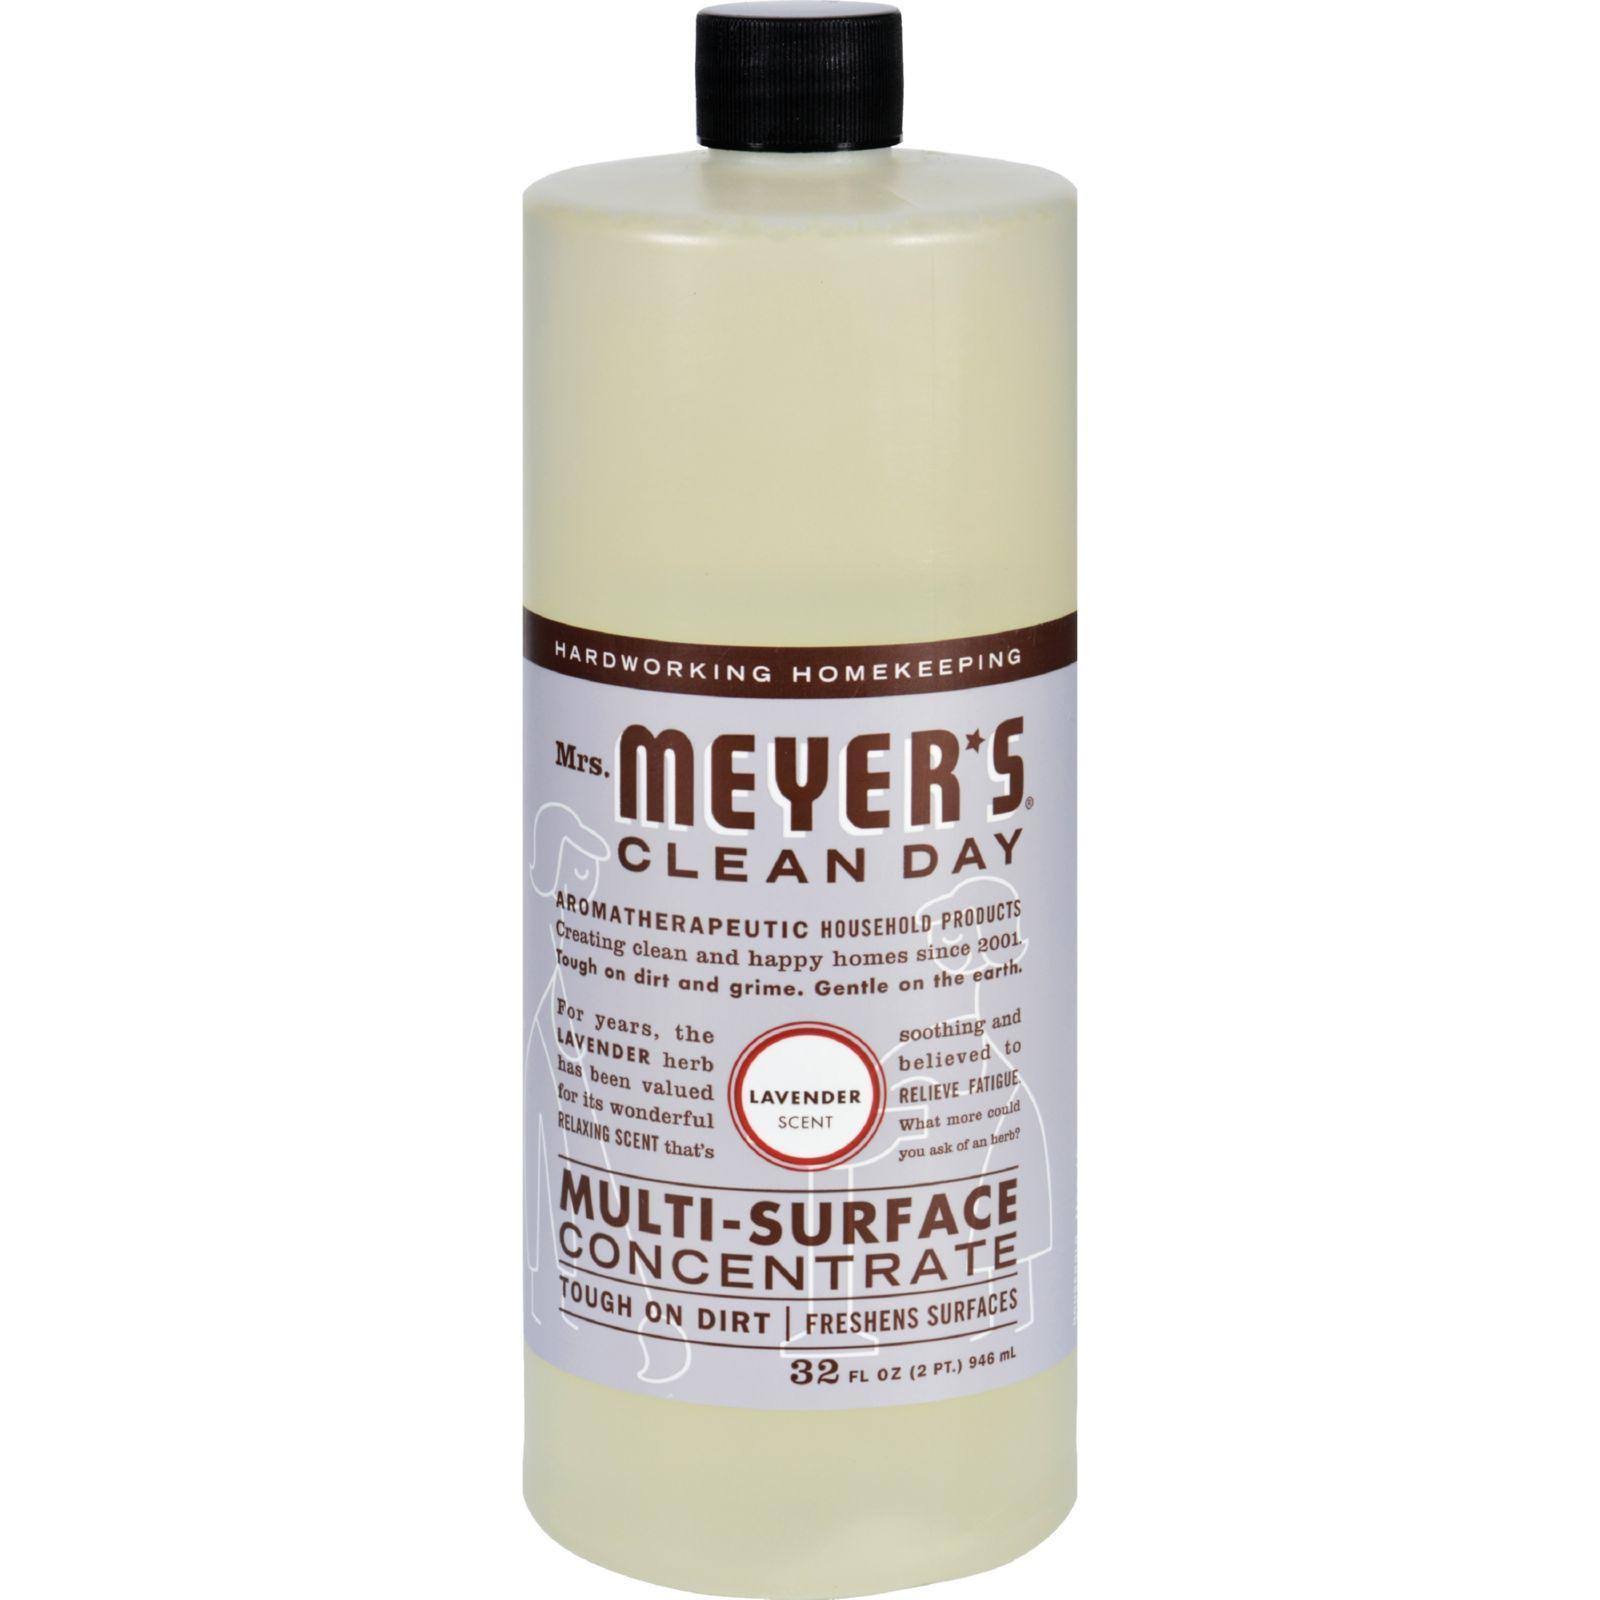 Mrs. Meyer's Clean Day Multi-Surface Concentrated Cleaner